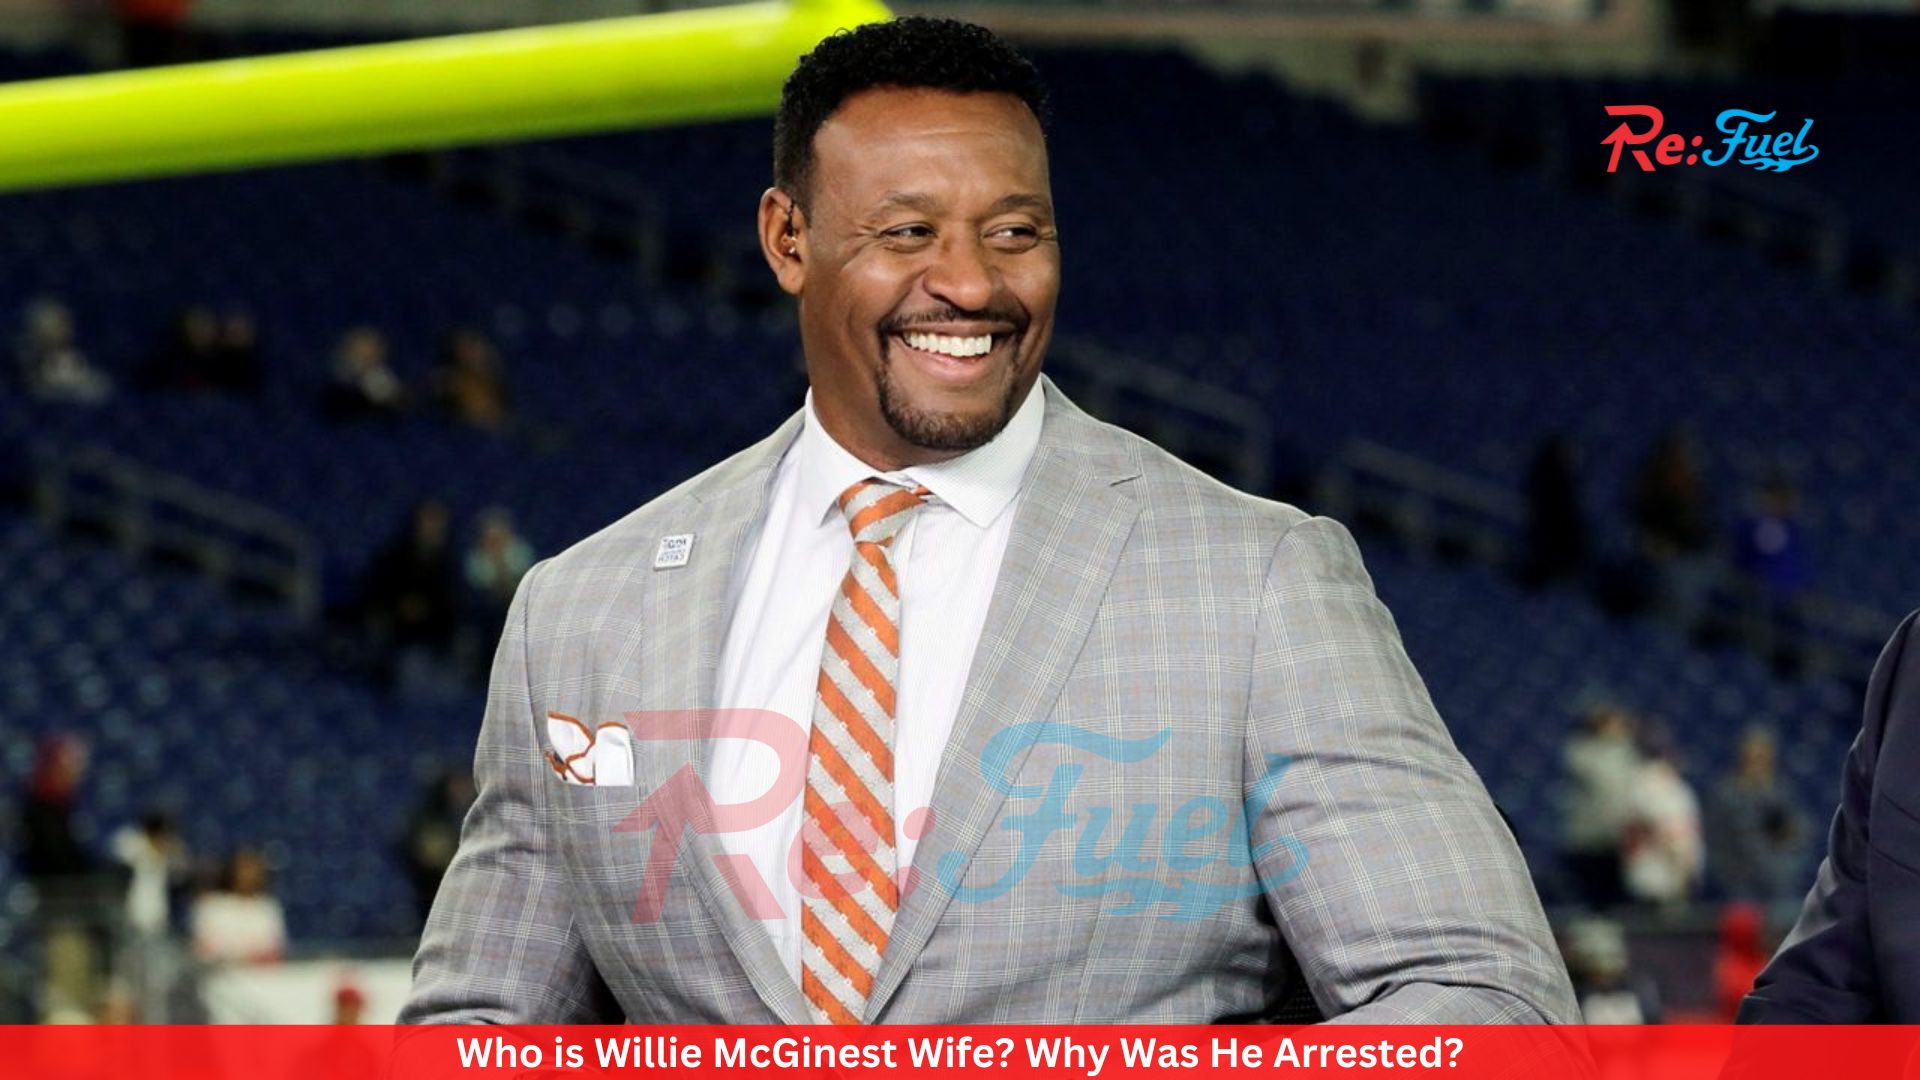 Who is Willie McGinest Wife? Why Was He Arrested?